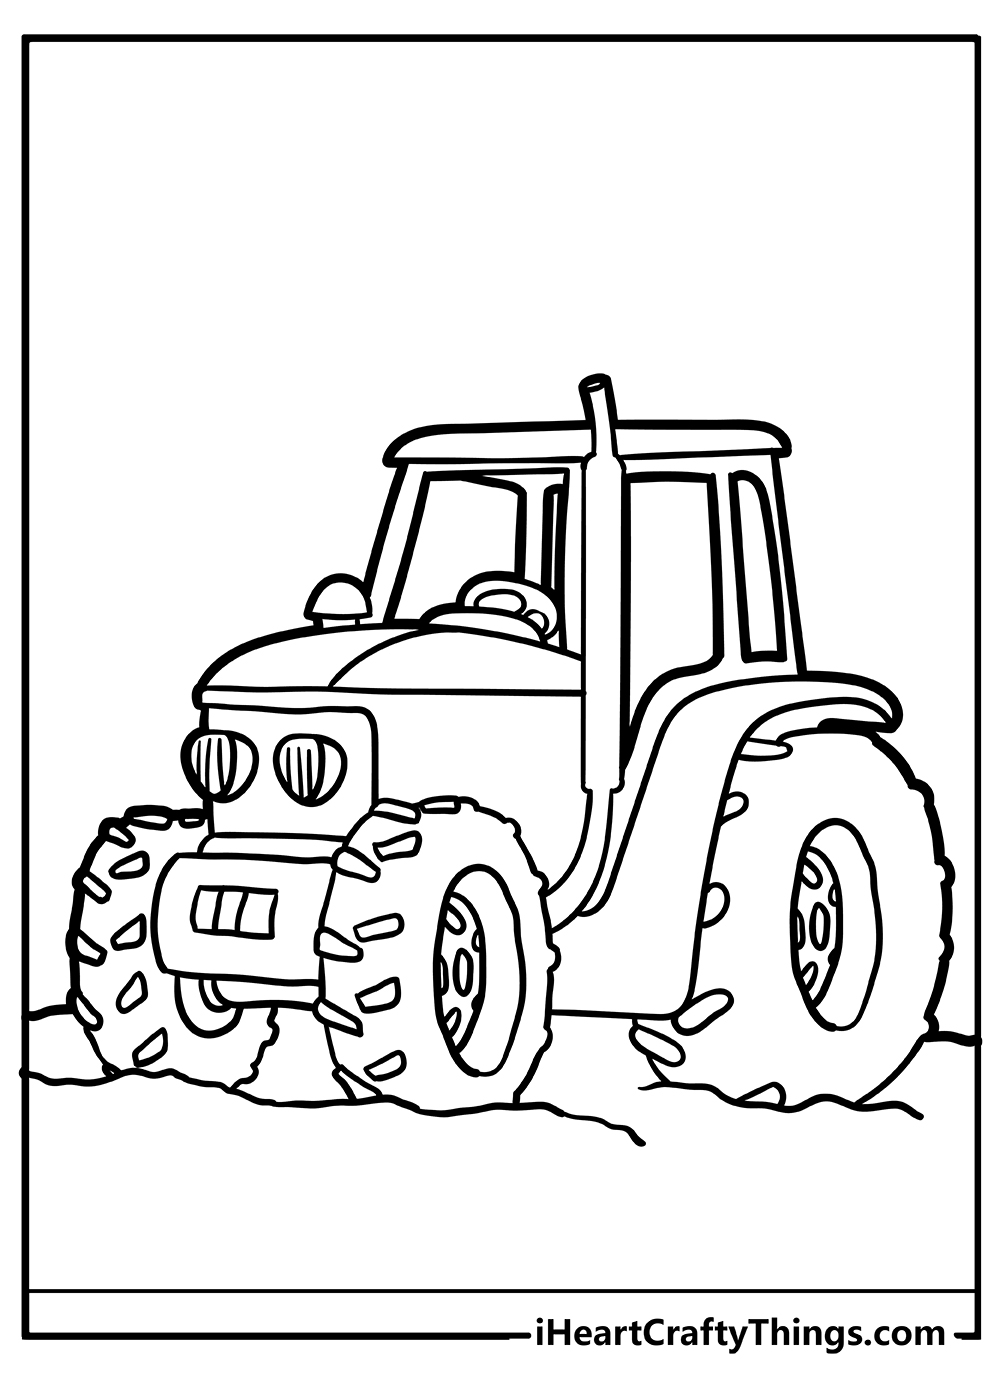 Tractor Coloring Pages for kids free download